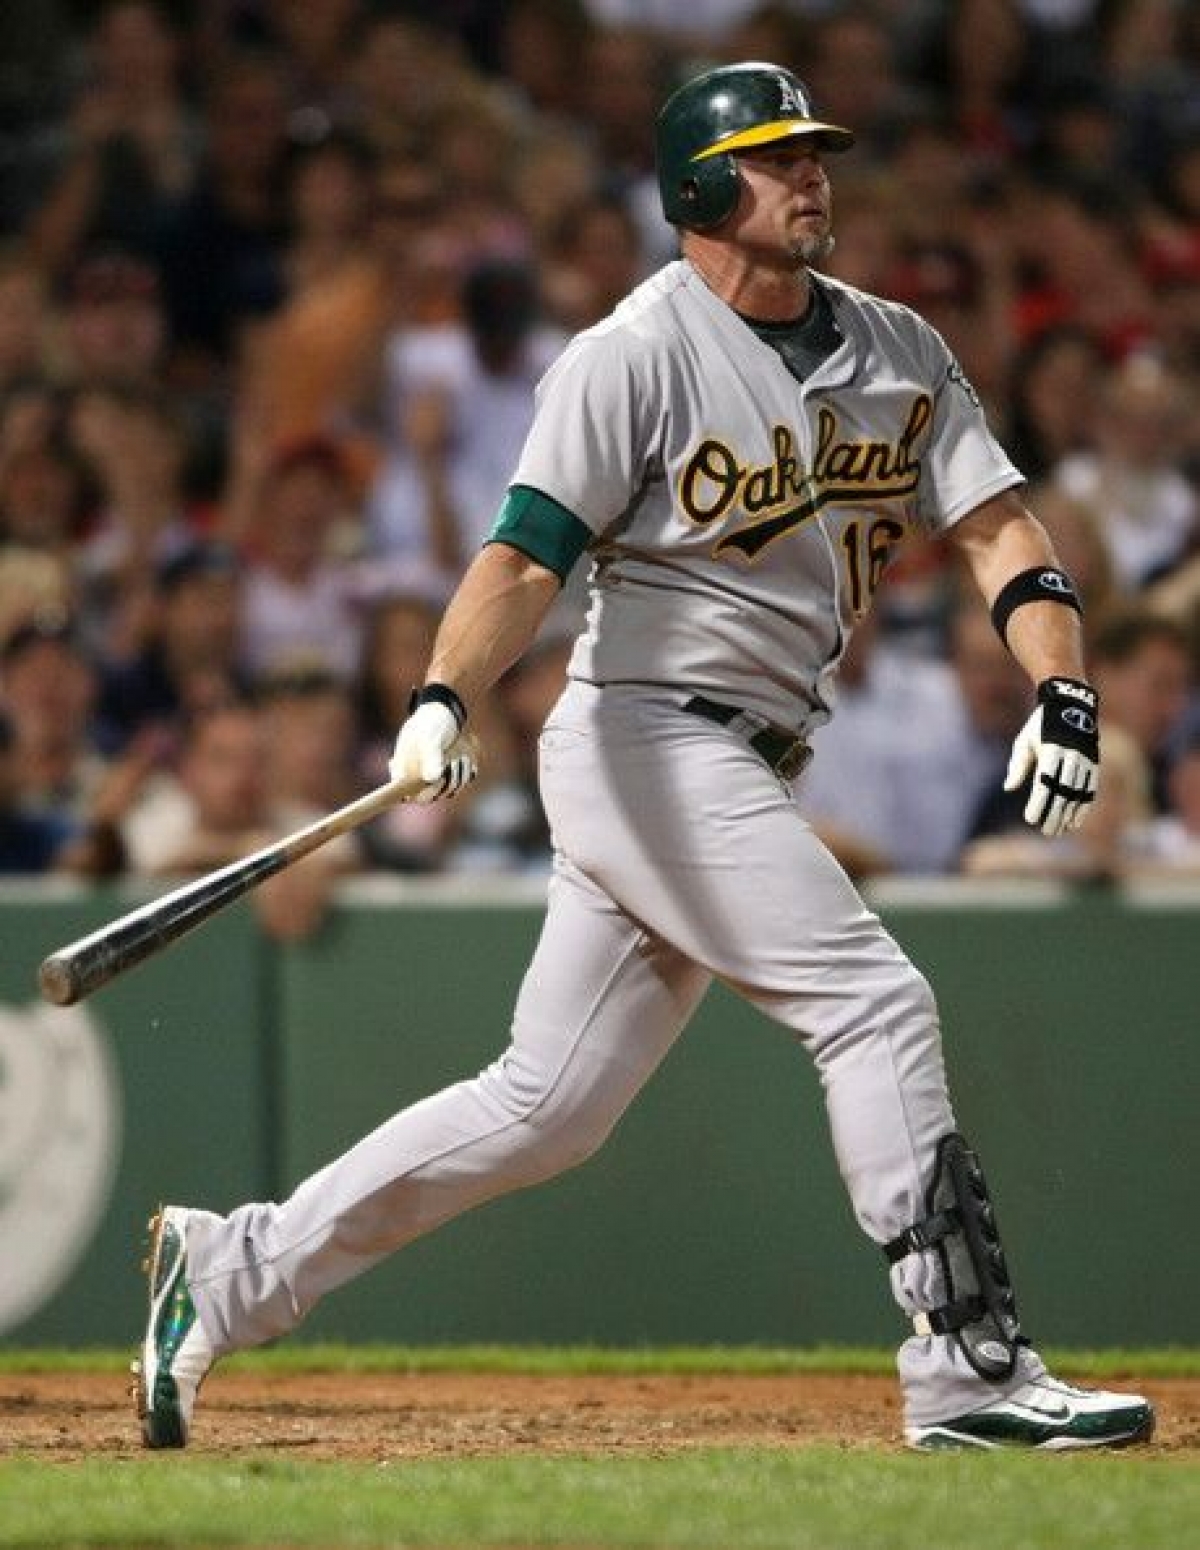 Not in Hall of Fame - 23. Jason Giambi